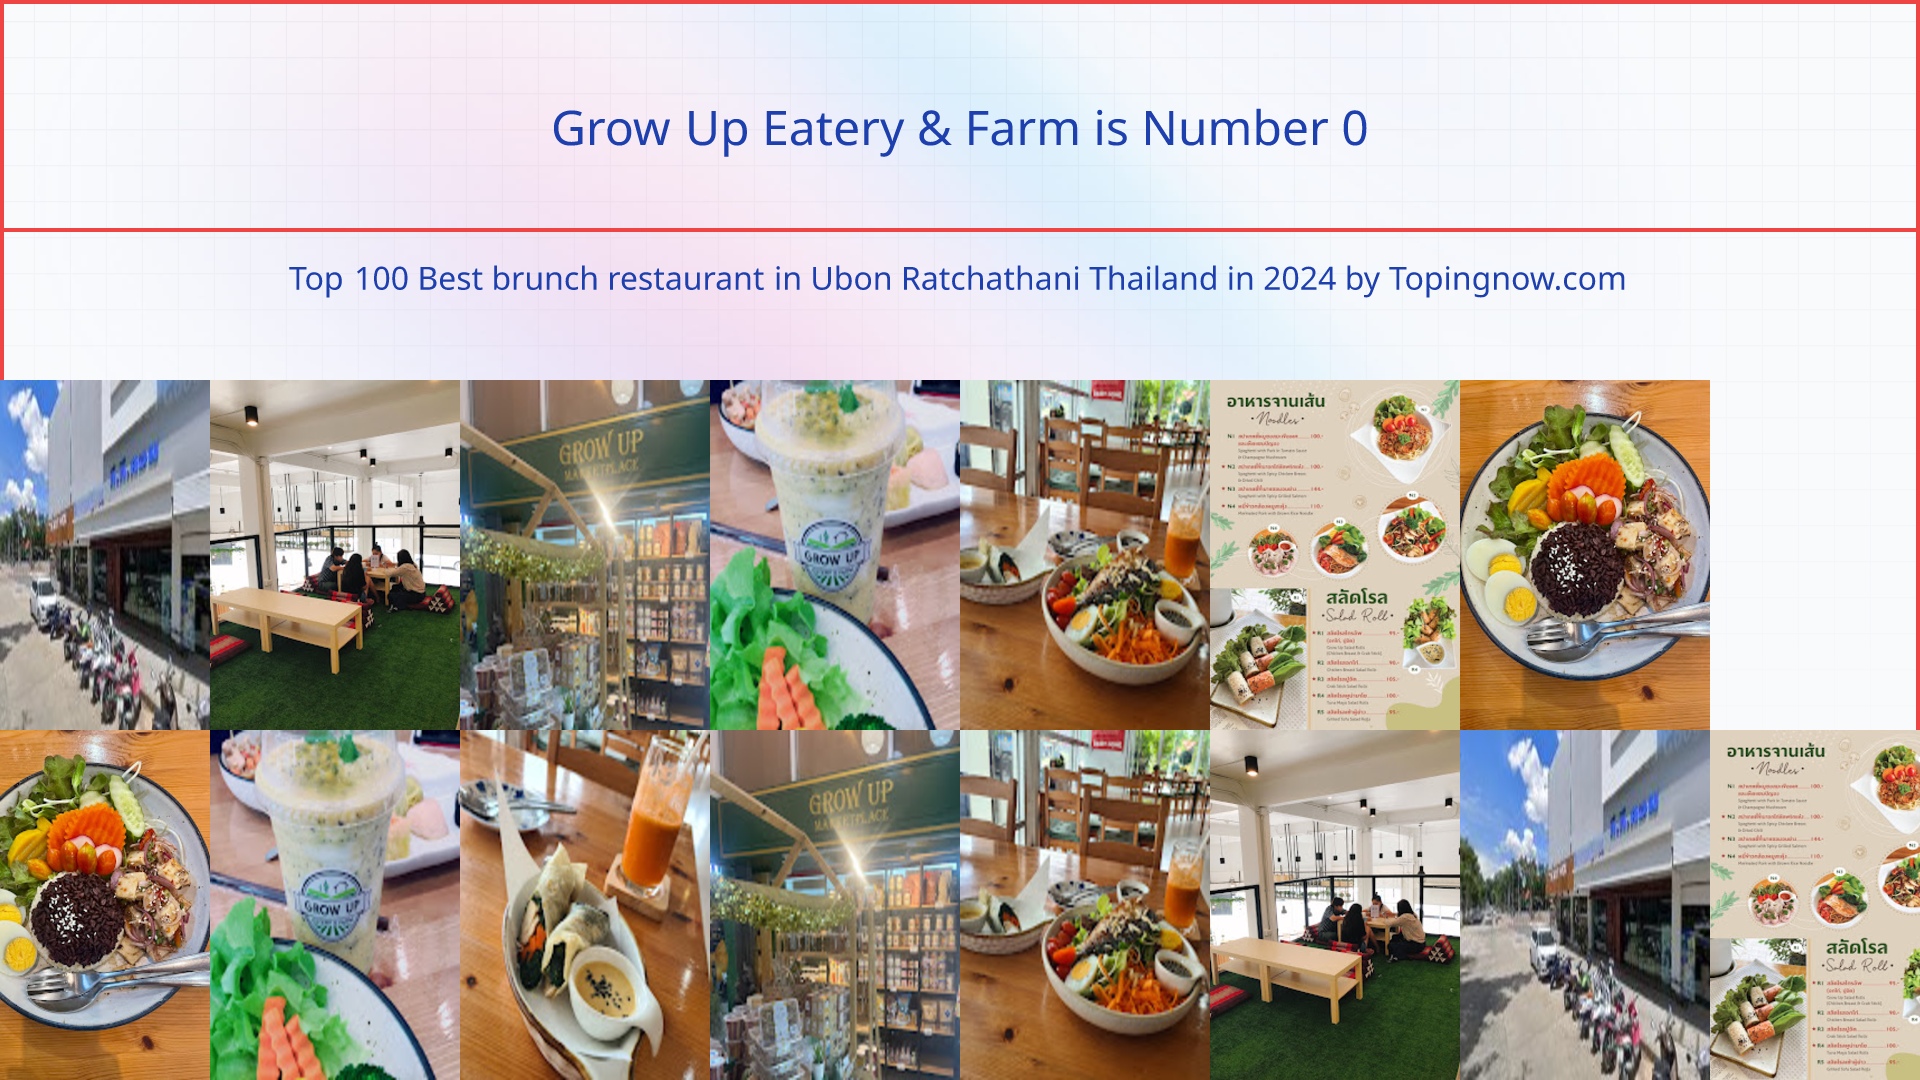 Grow Up Eatery & Farm: Top 100 Best brunch restaurant in Ubon Ratchathani Thailand in 2024